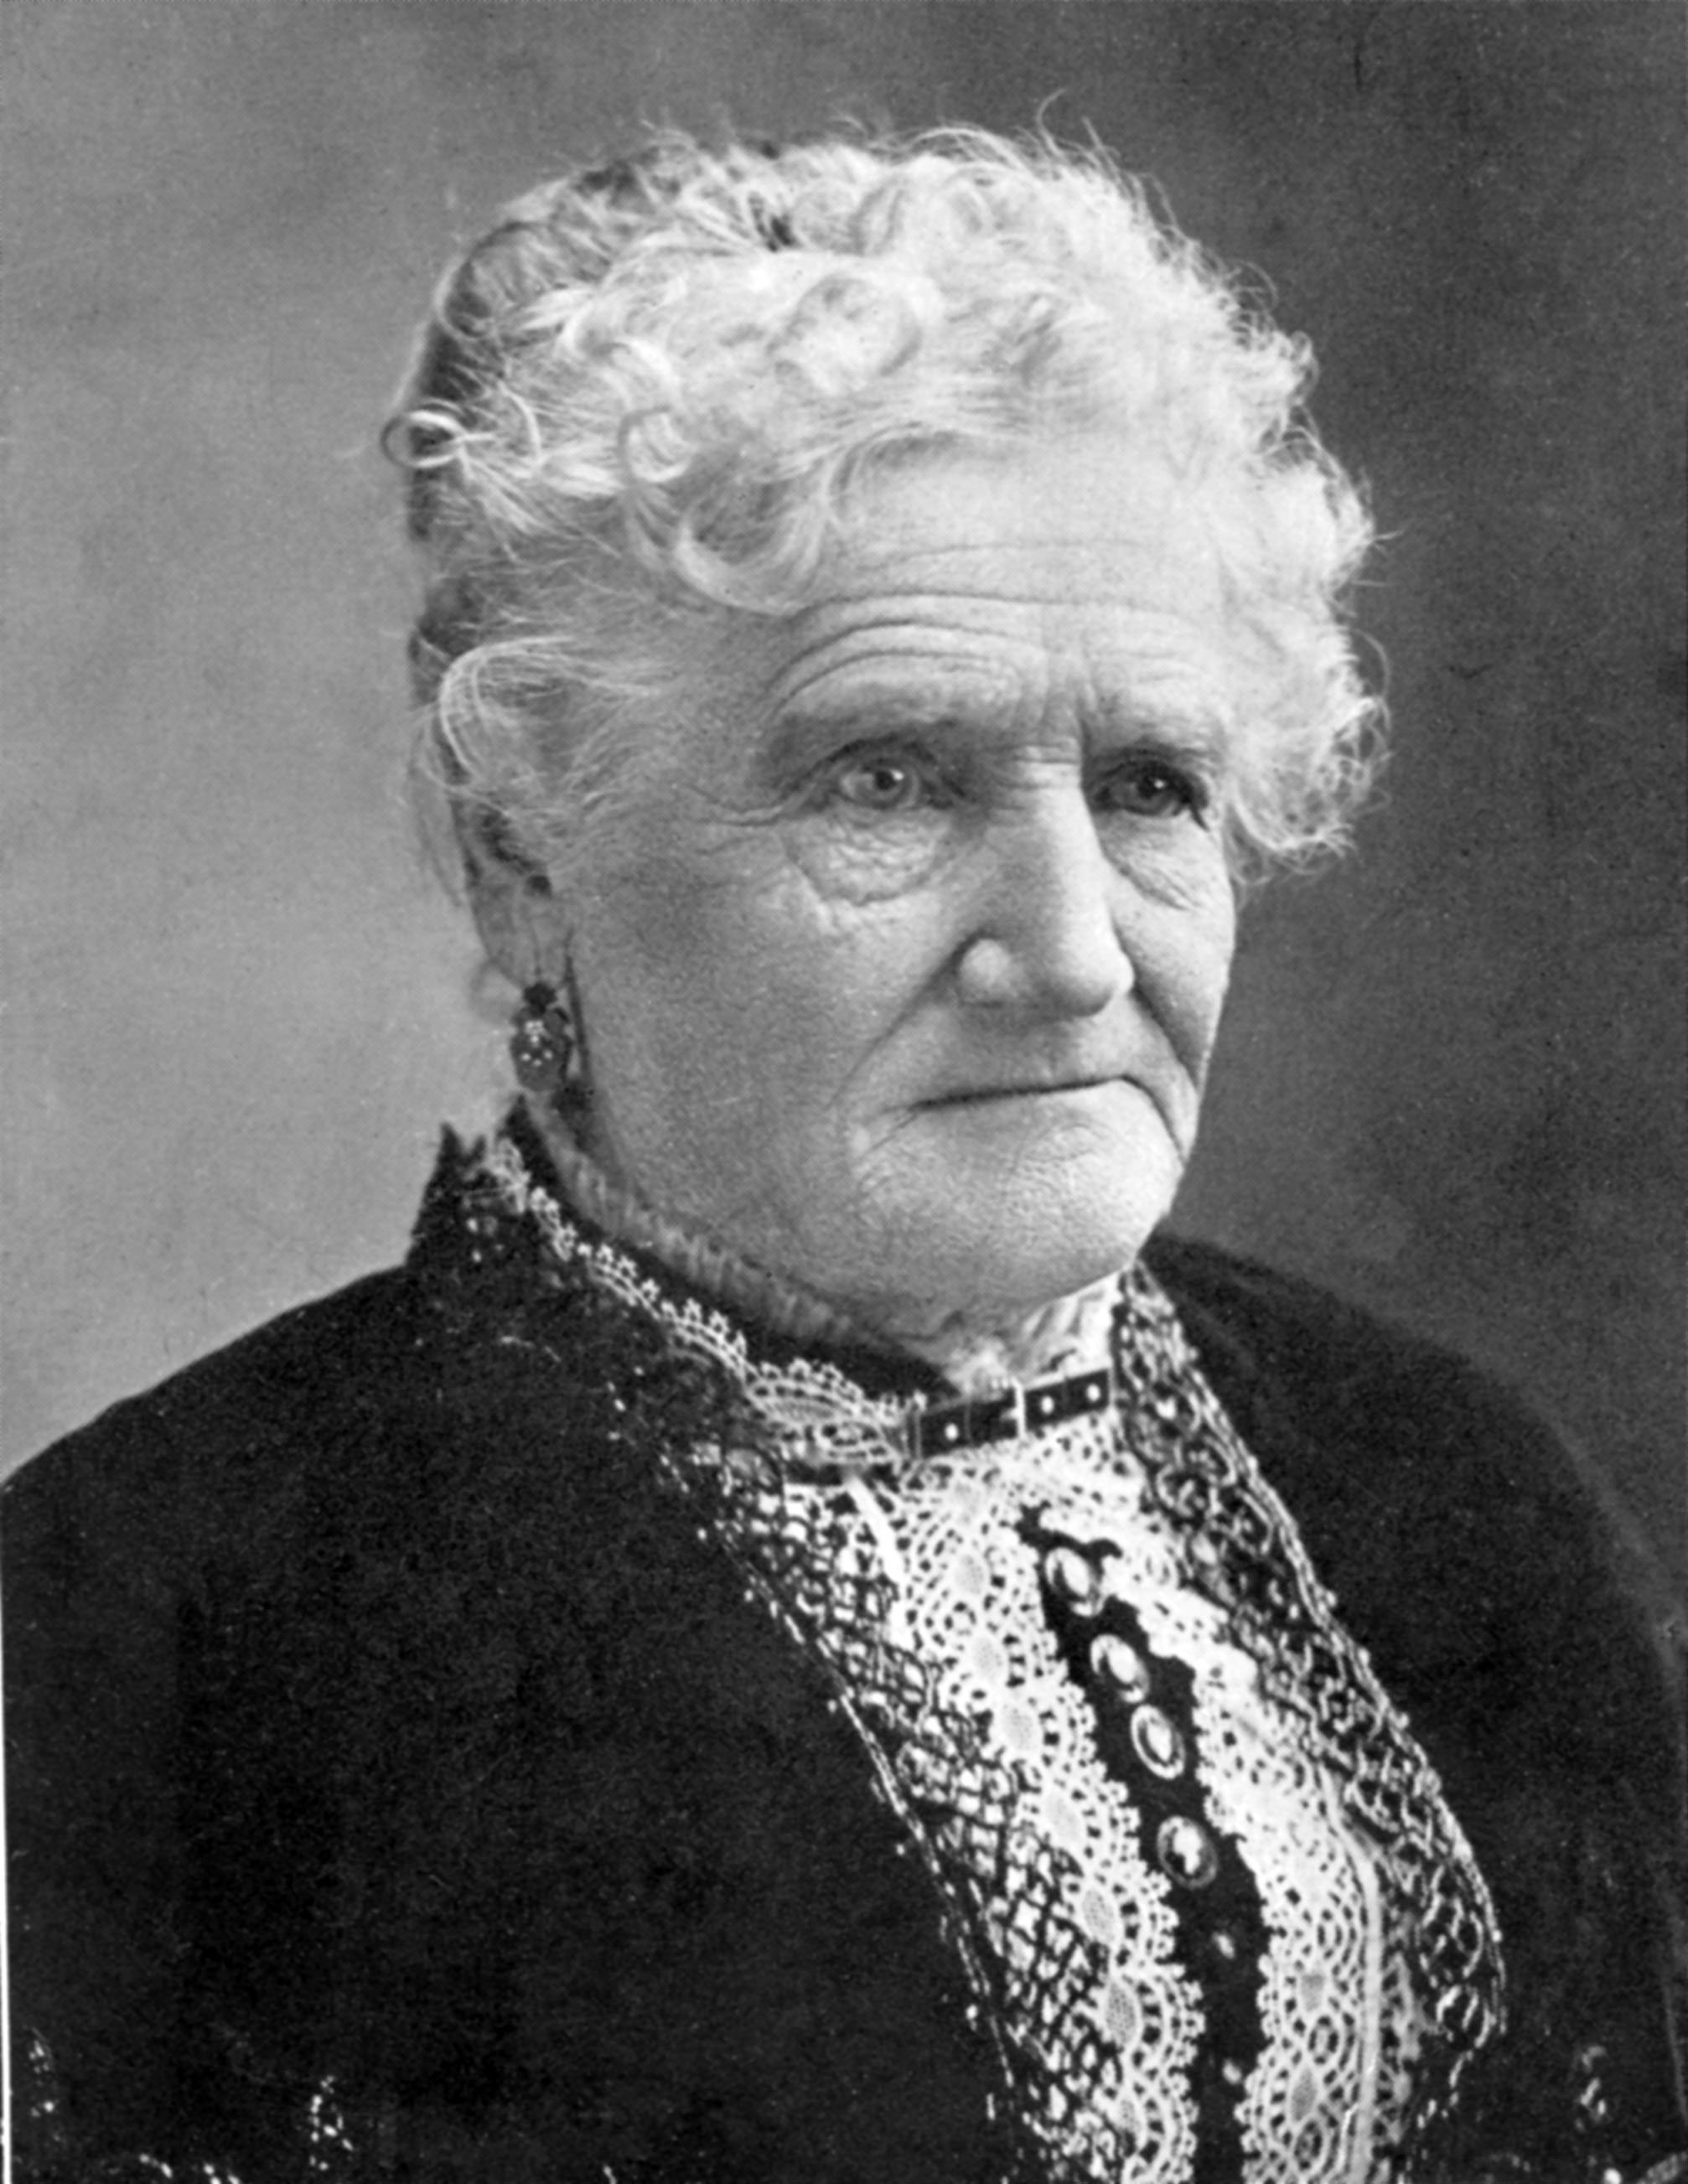 woman seated, facing the camera, in a dark shirt with lace collar